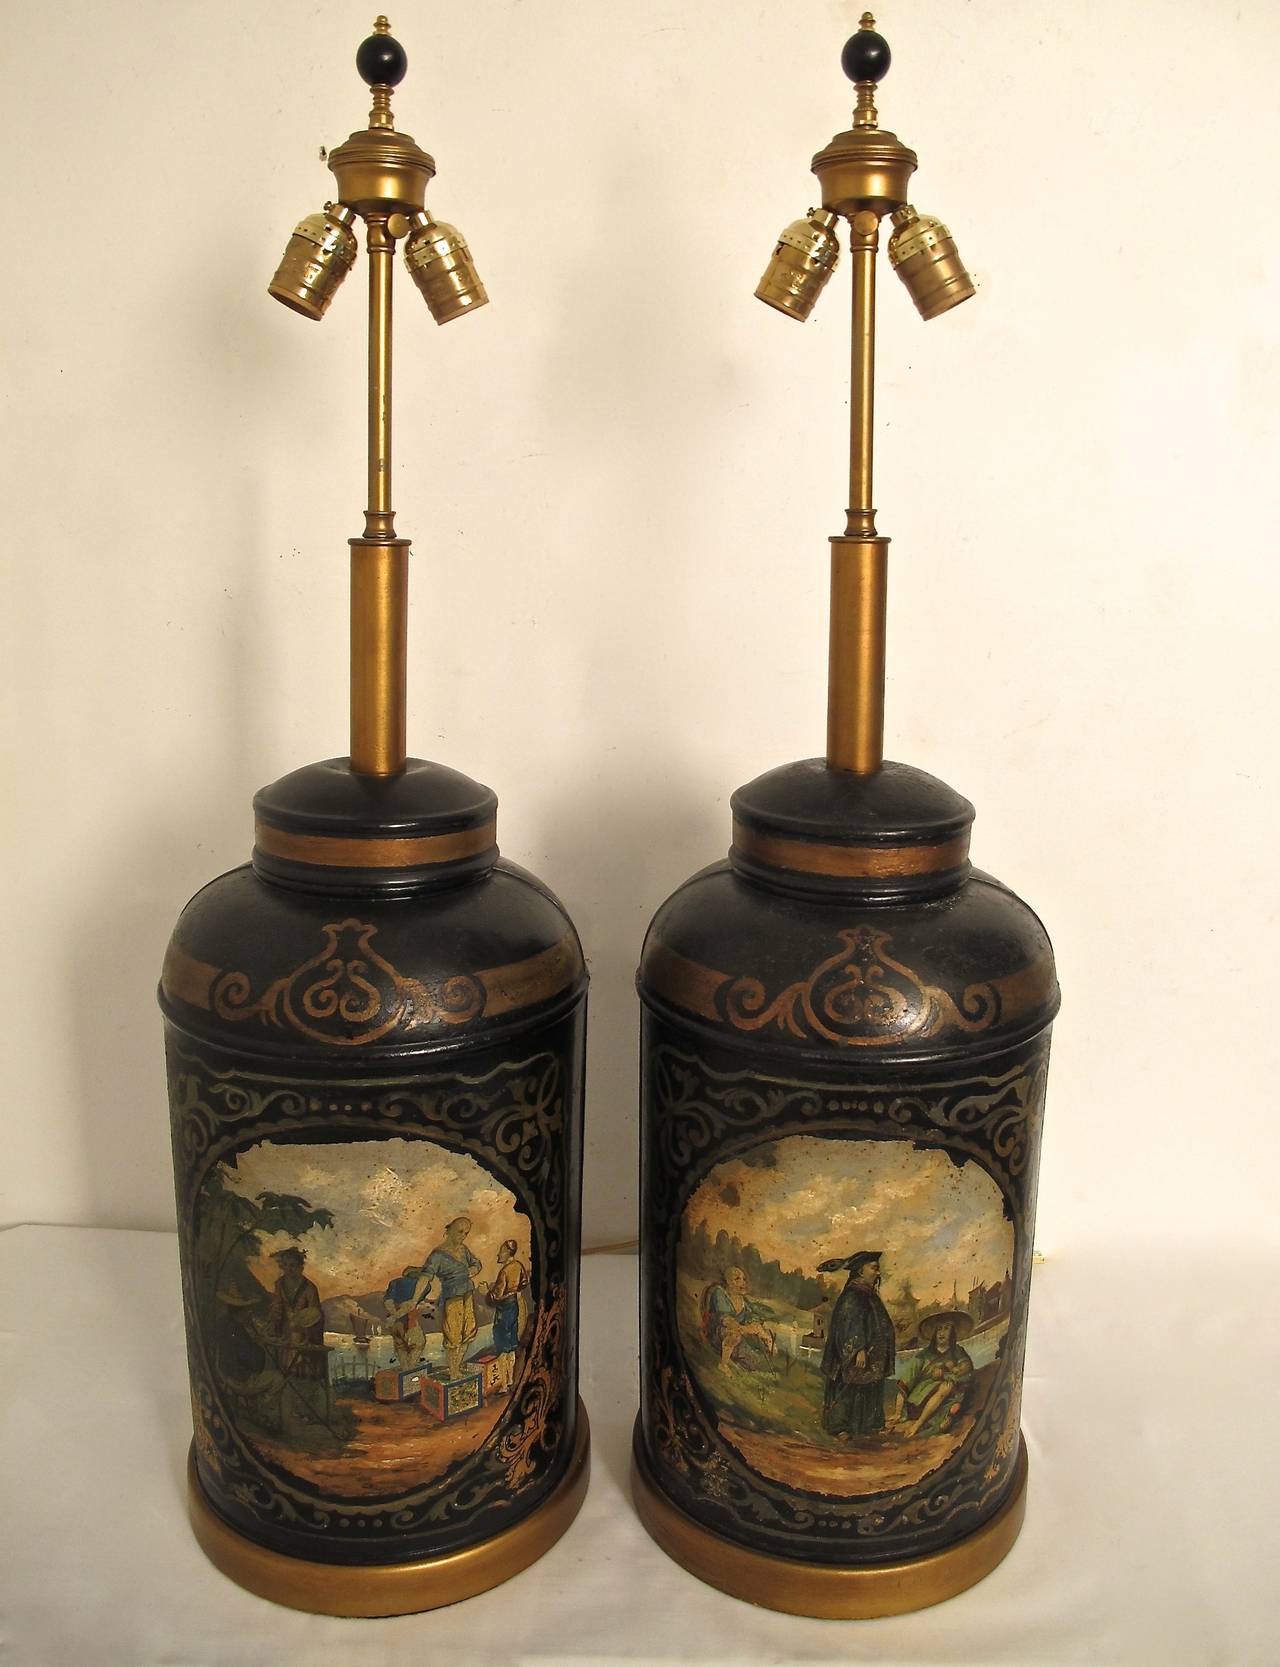 A pair of genuine tole painted tea canisters now converted to lamps. England, early to mid-19th century.